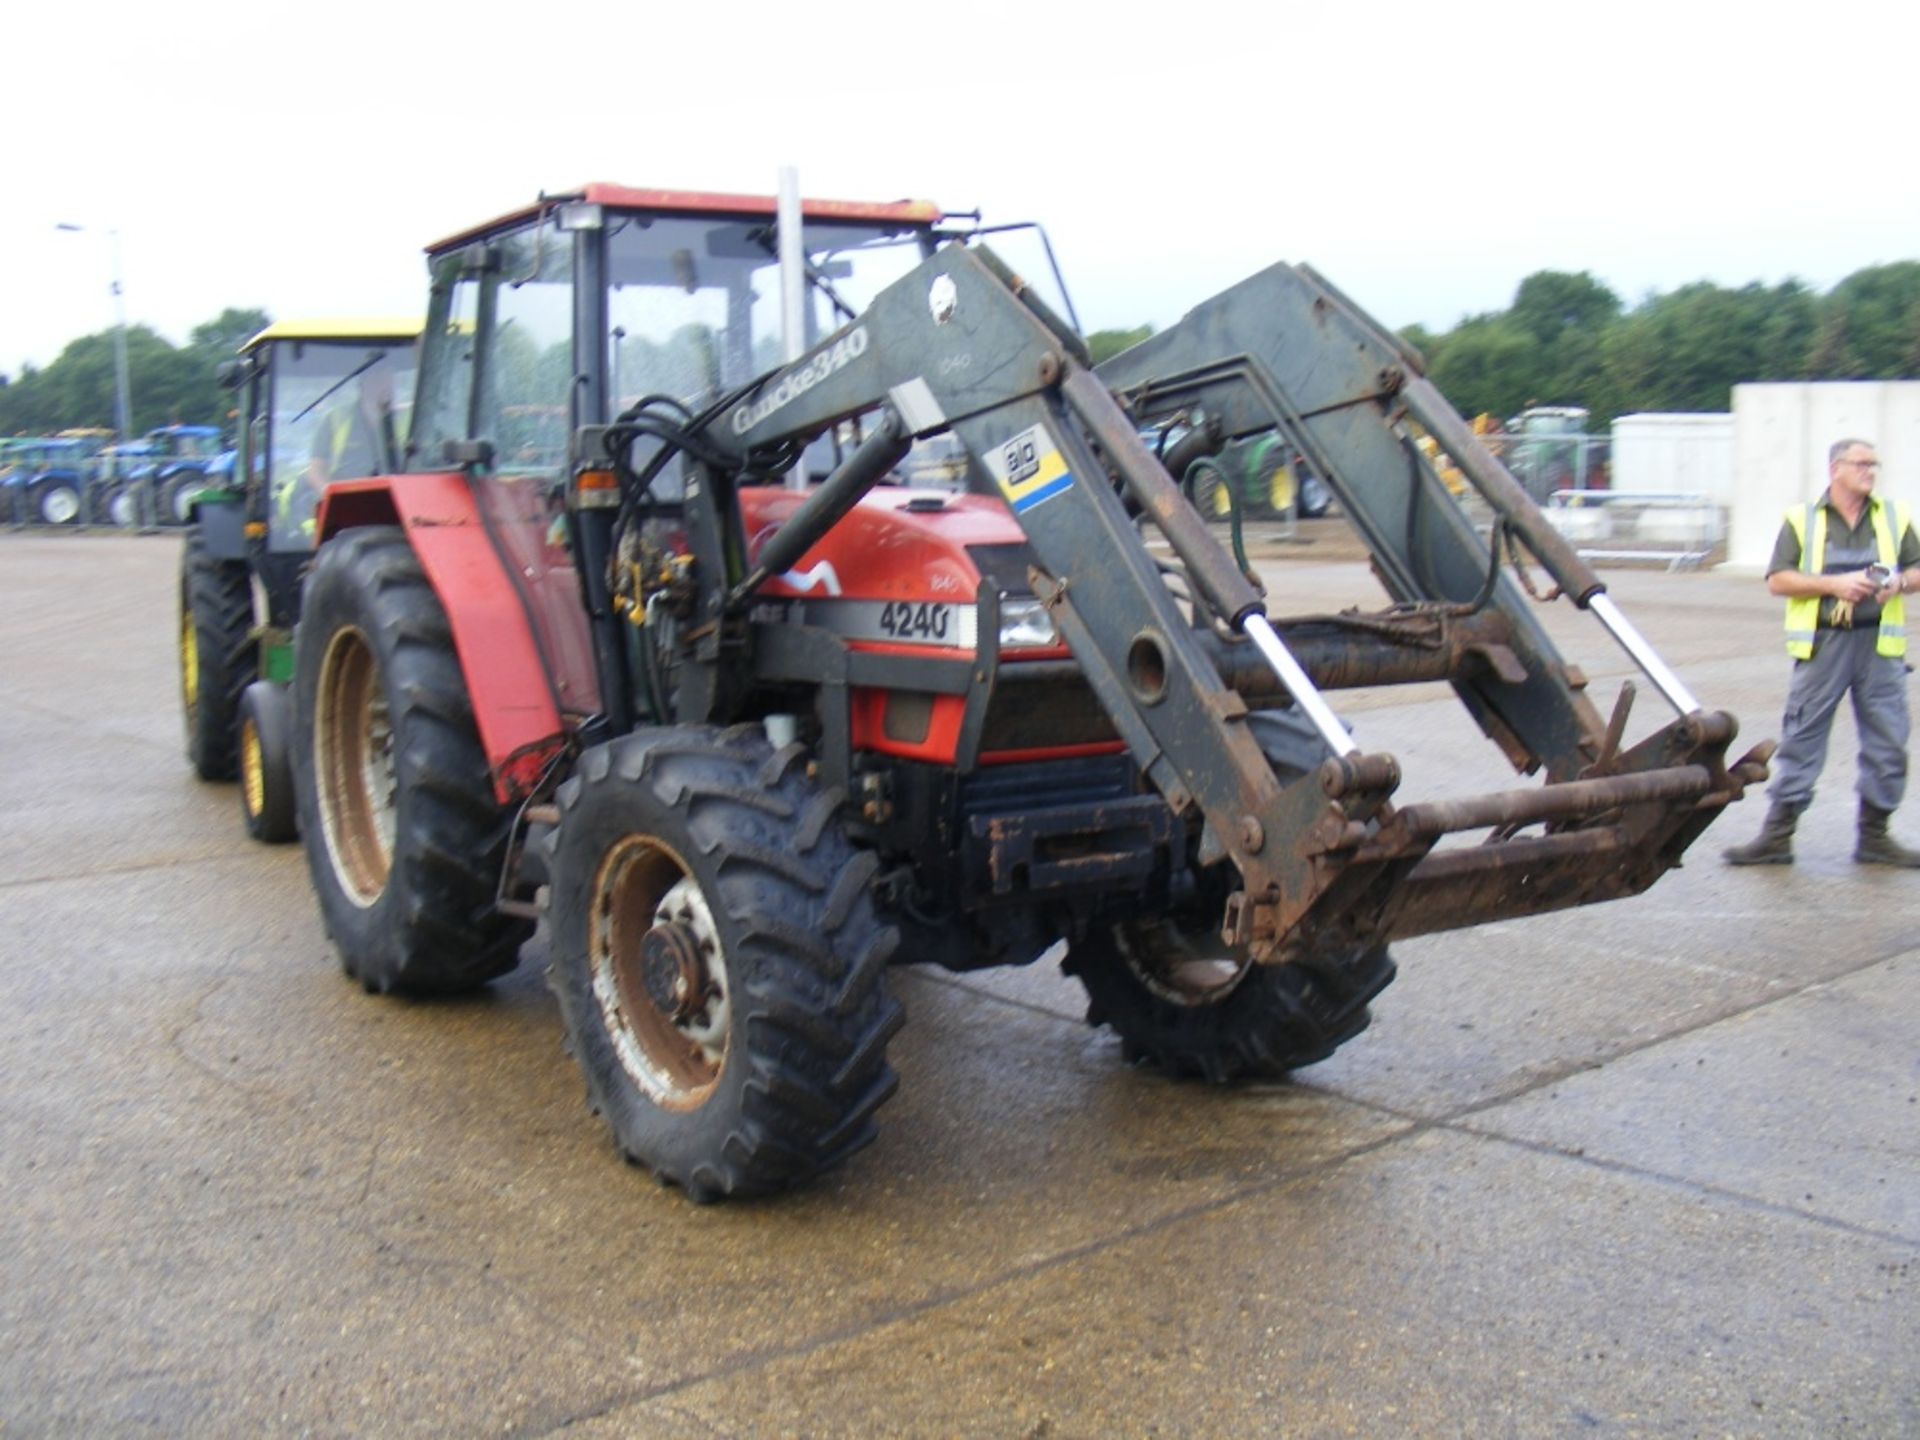 Case International 4240 Pro 4wd Tractor with Quicke 340 Loader. V5 will be supplied. Reg. No. P307 - Image 3 of 6